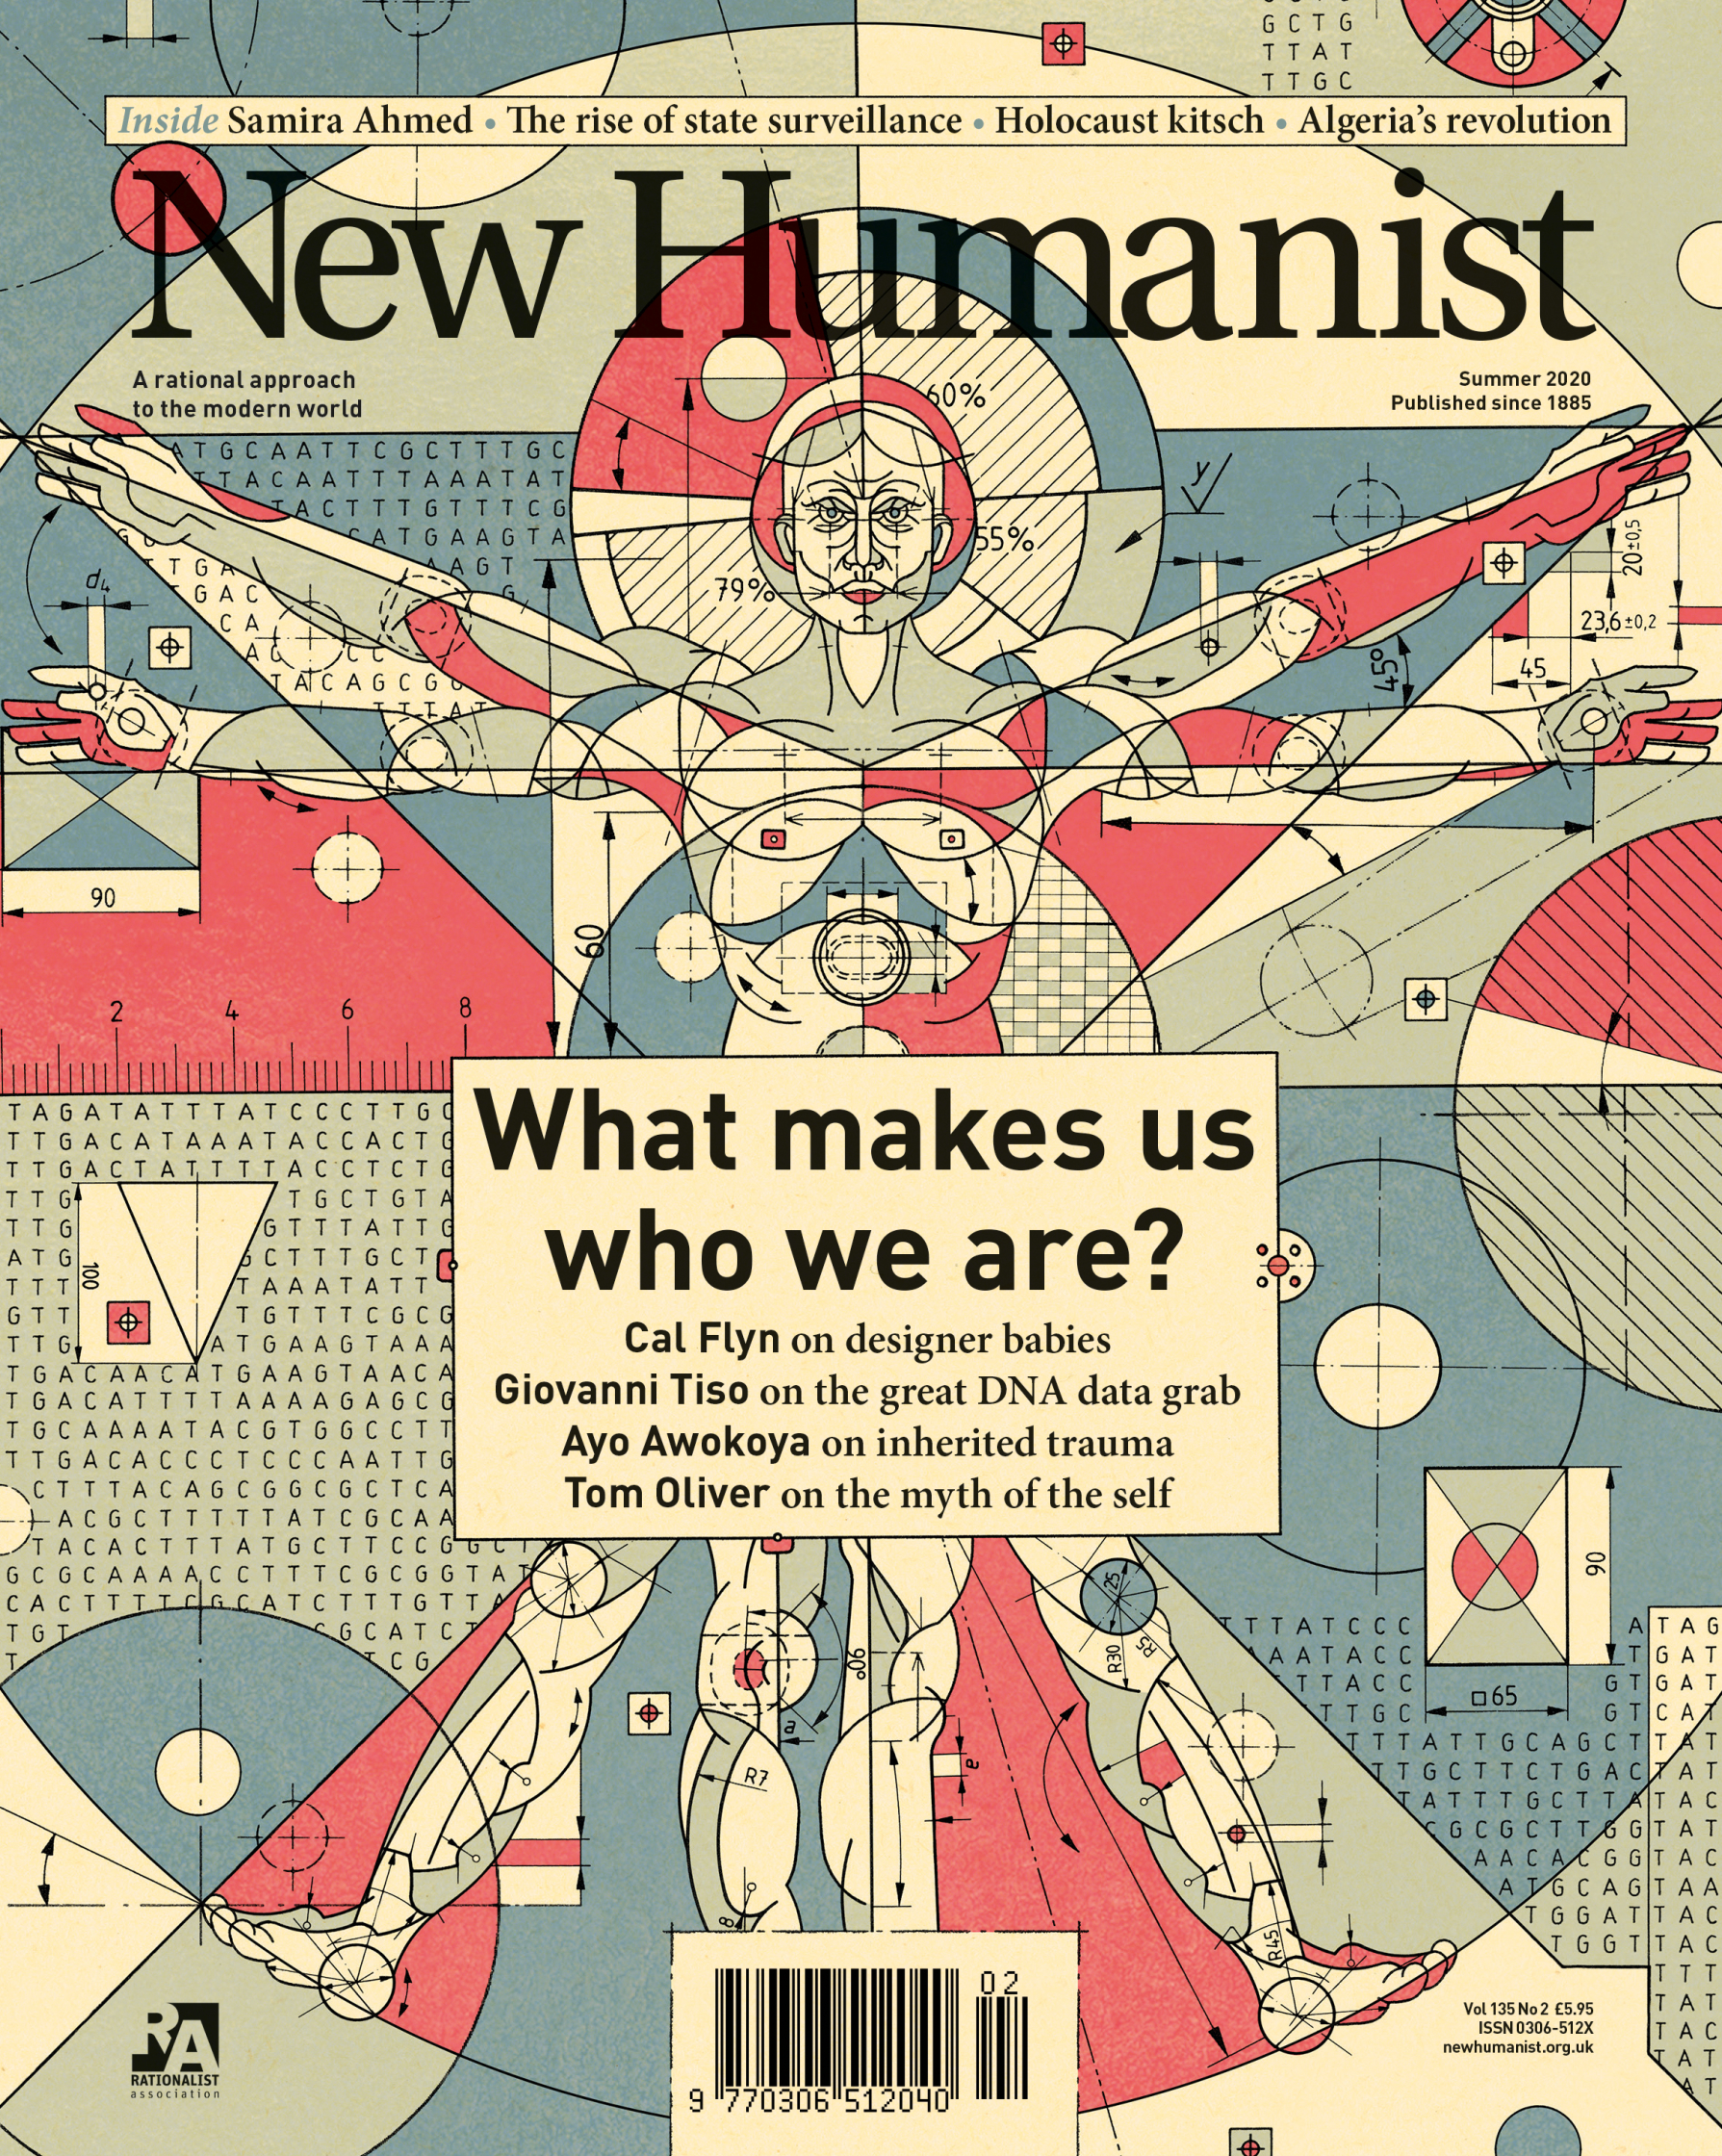 New Humanist_What makes us who we are.jpg